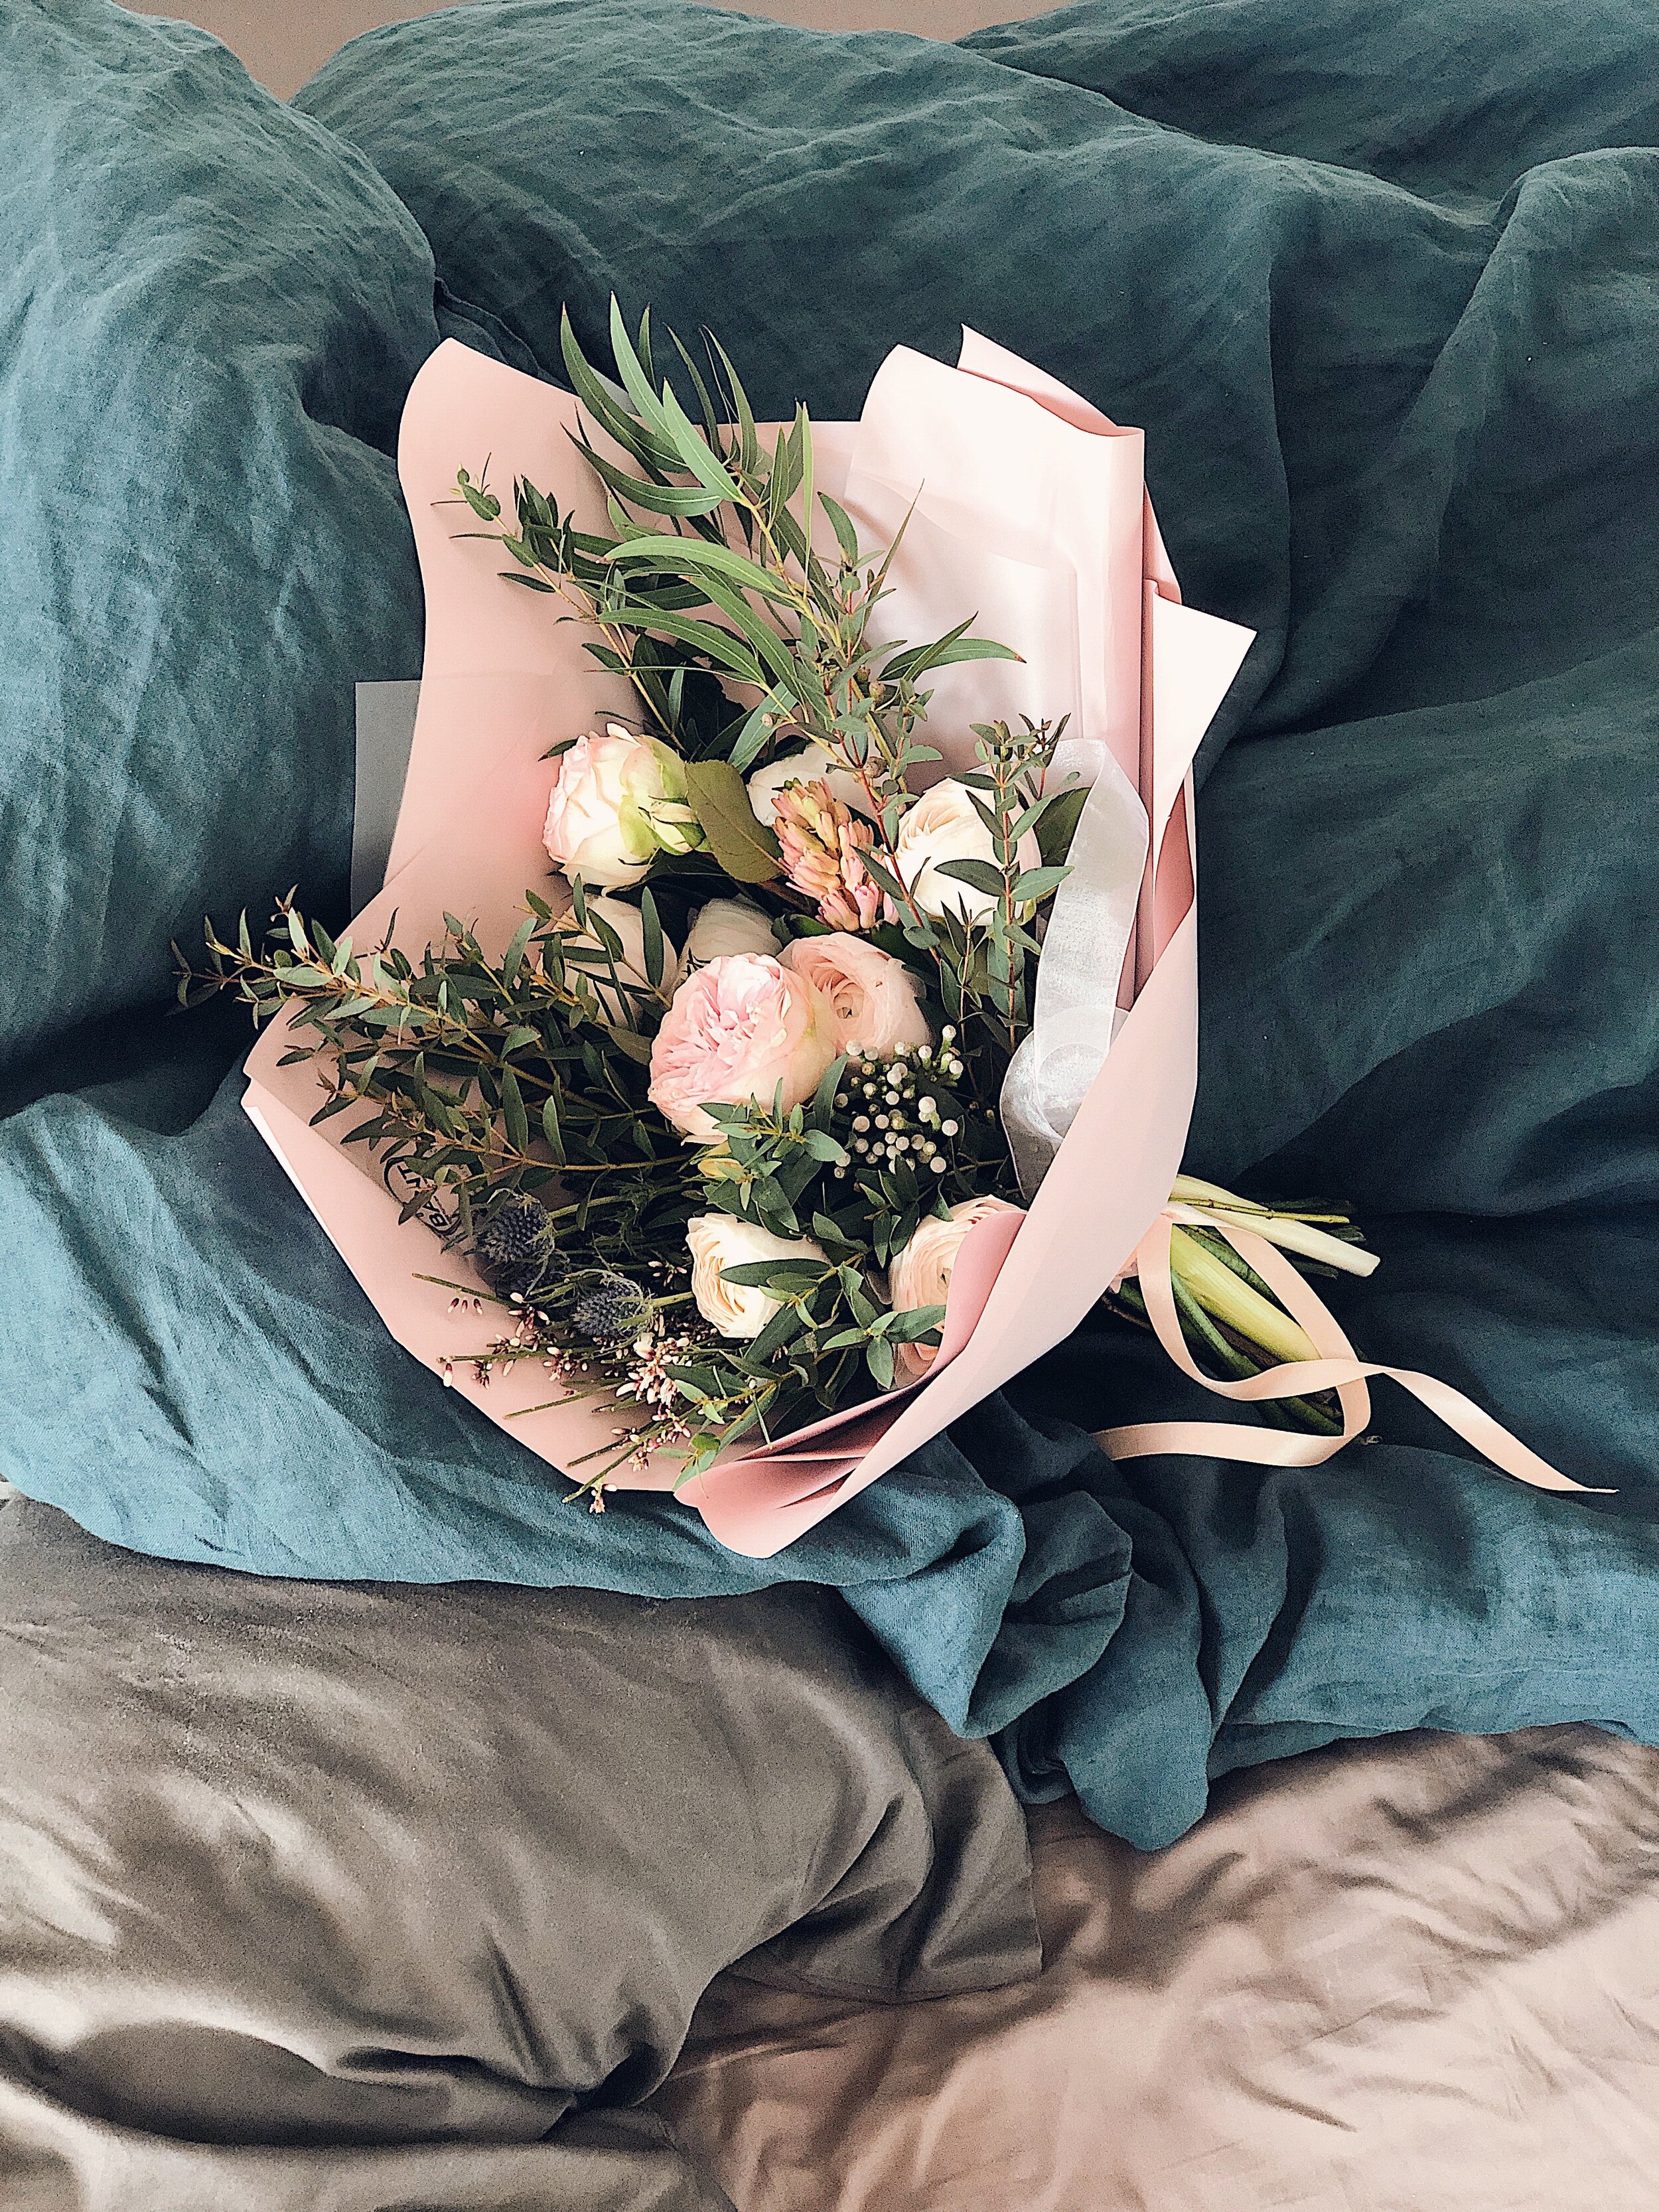 pink-and-green-flower-bouquet-on-bed-sheet-929976.jpg